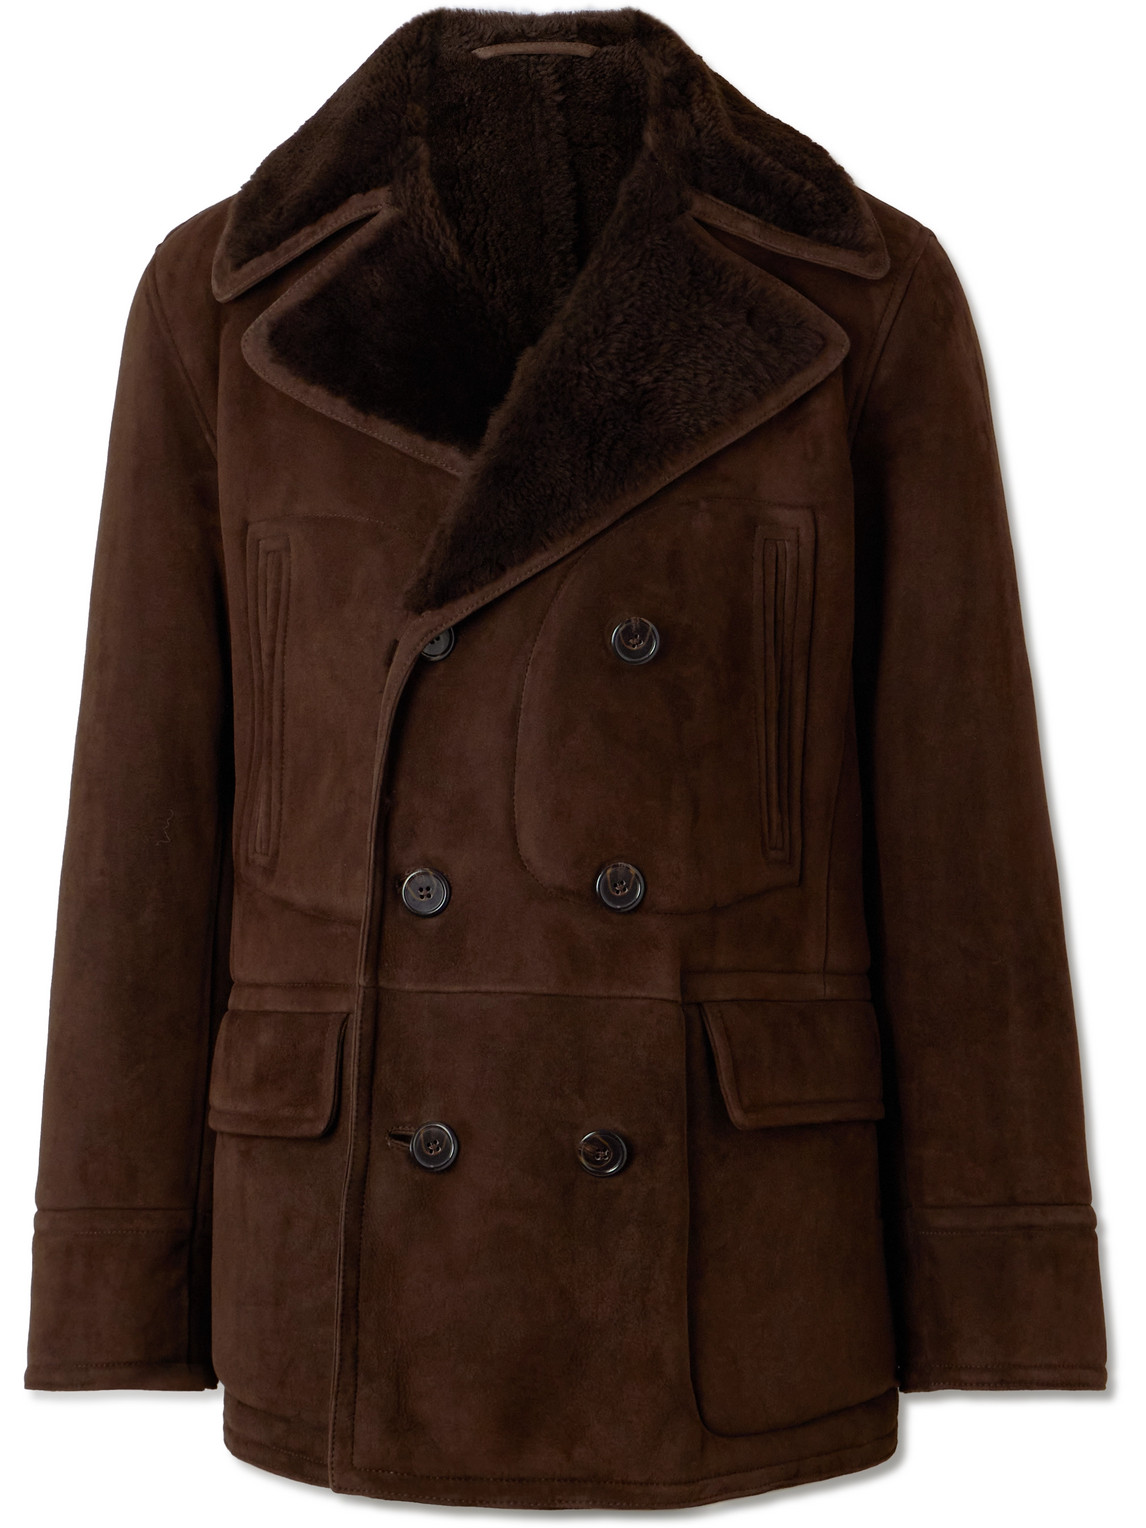 POLO RALPH LAUREN THE POLO DOUBLE-BREASTED SHEARLING COAT